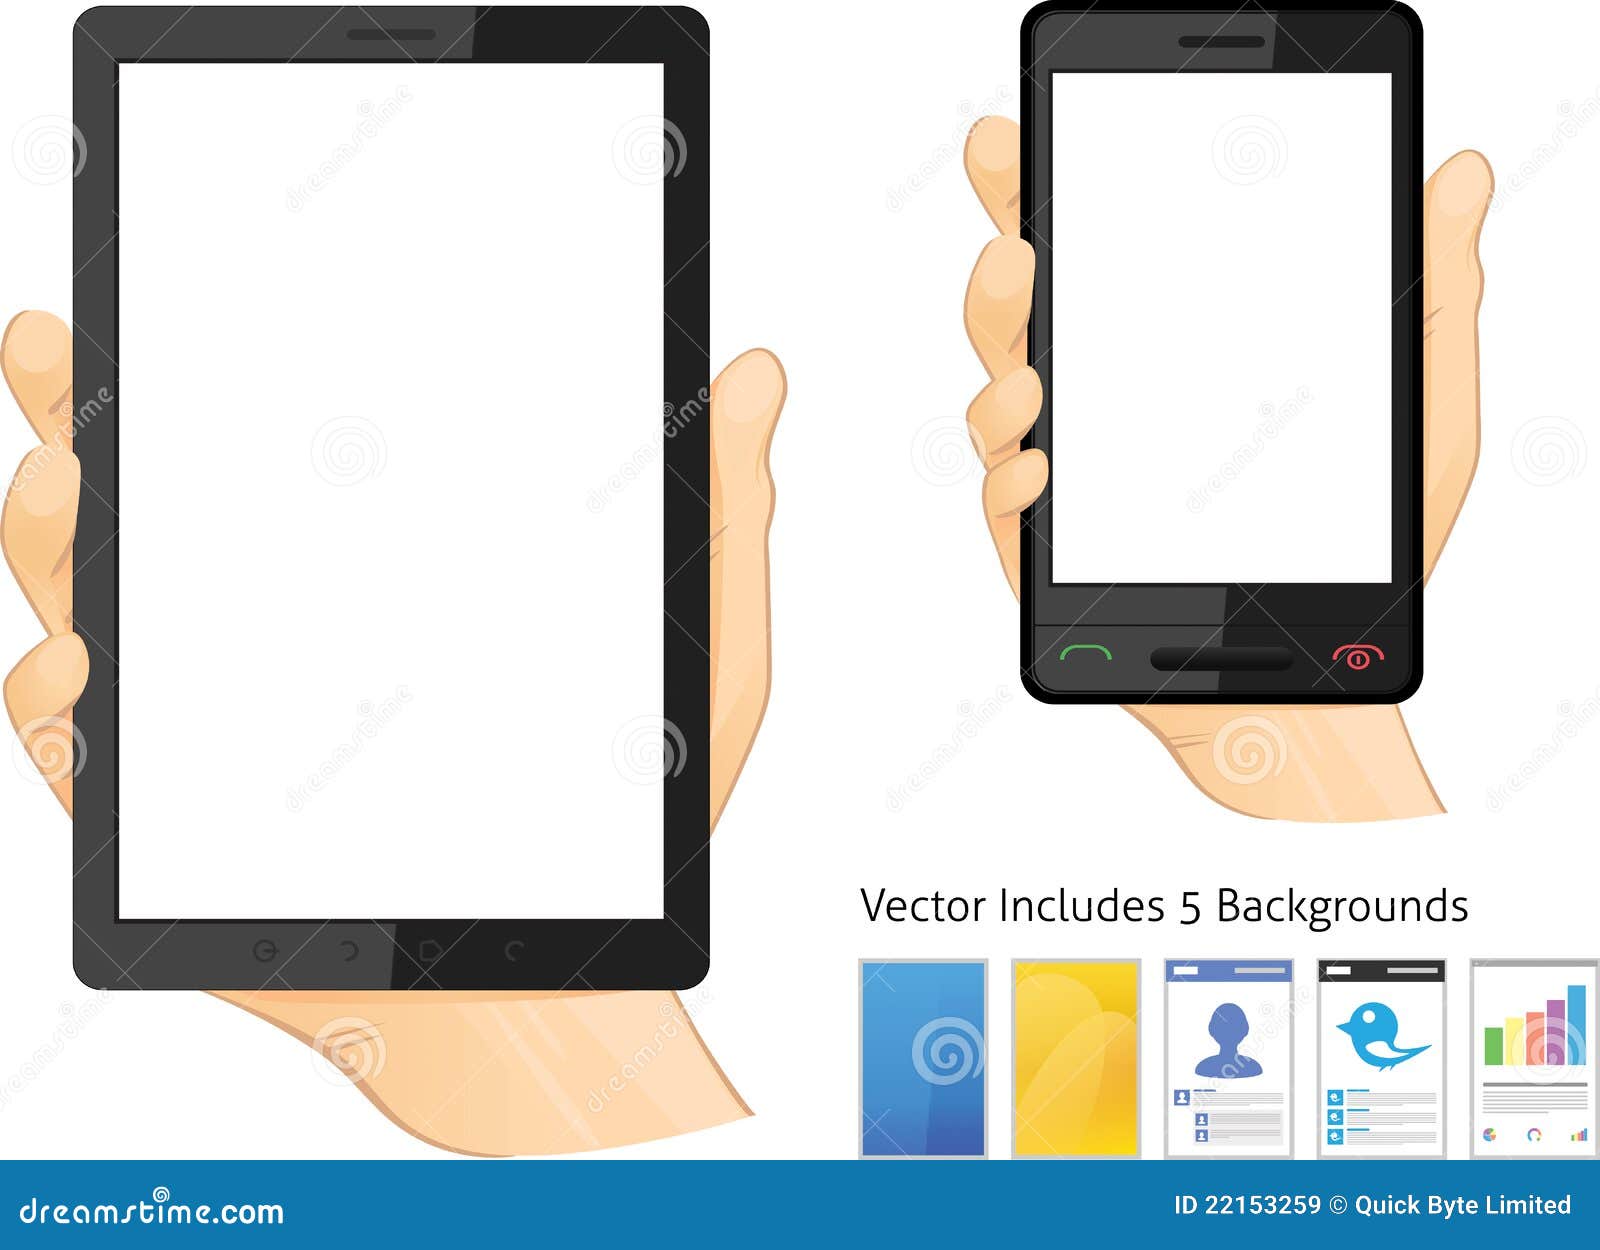 phone tablet clipart - photo #29